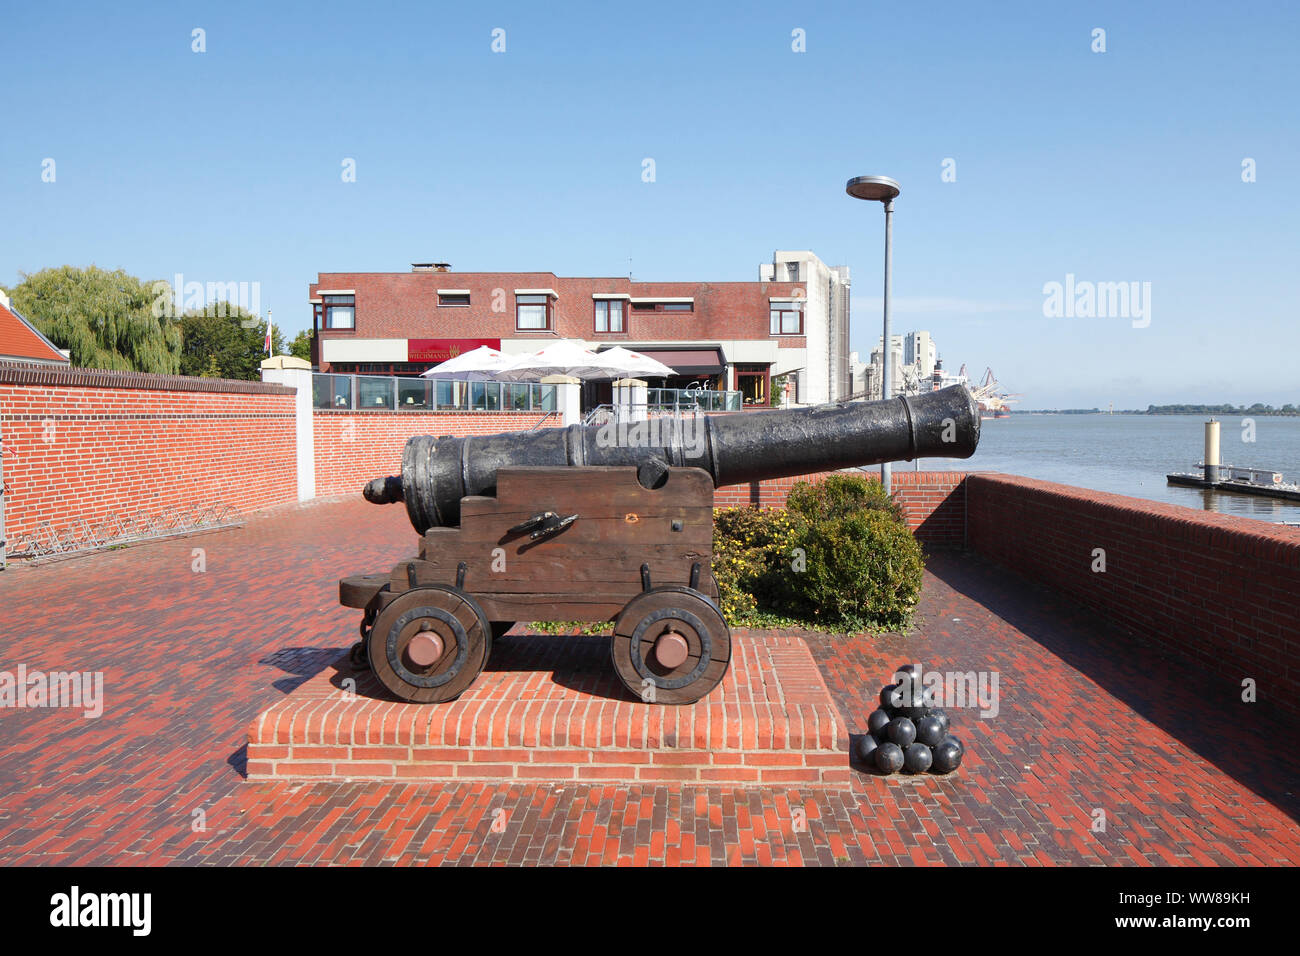 Old cannon, Maritime Museum, Brake, Wesermarsch district, Lower Saxony, Germany, Europe Stock Photo